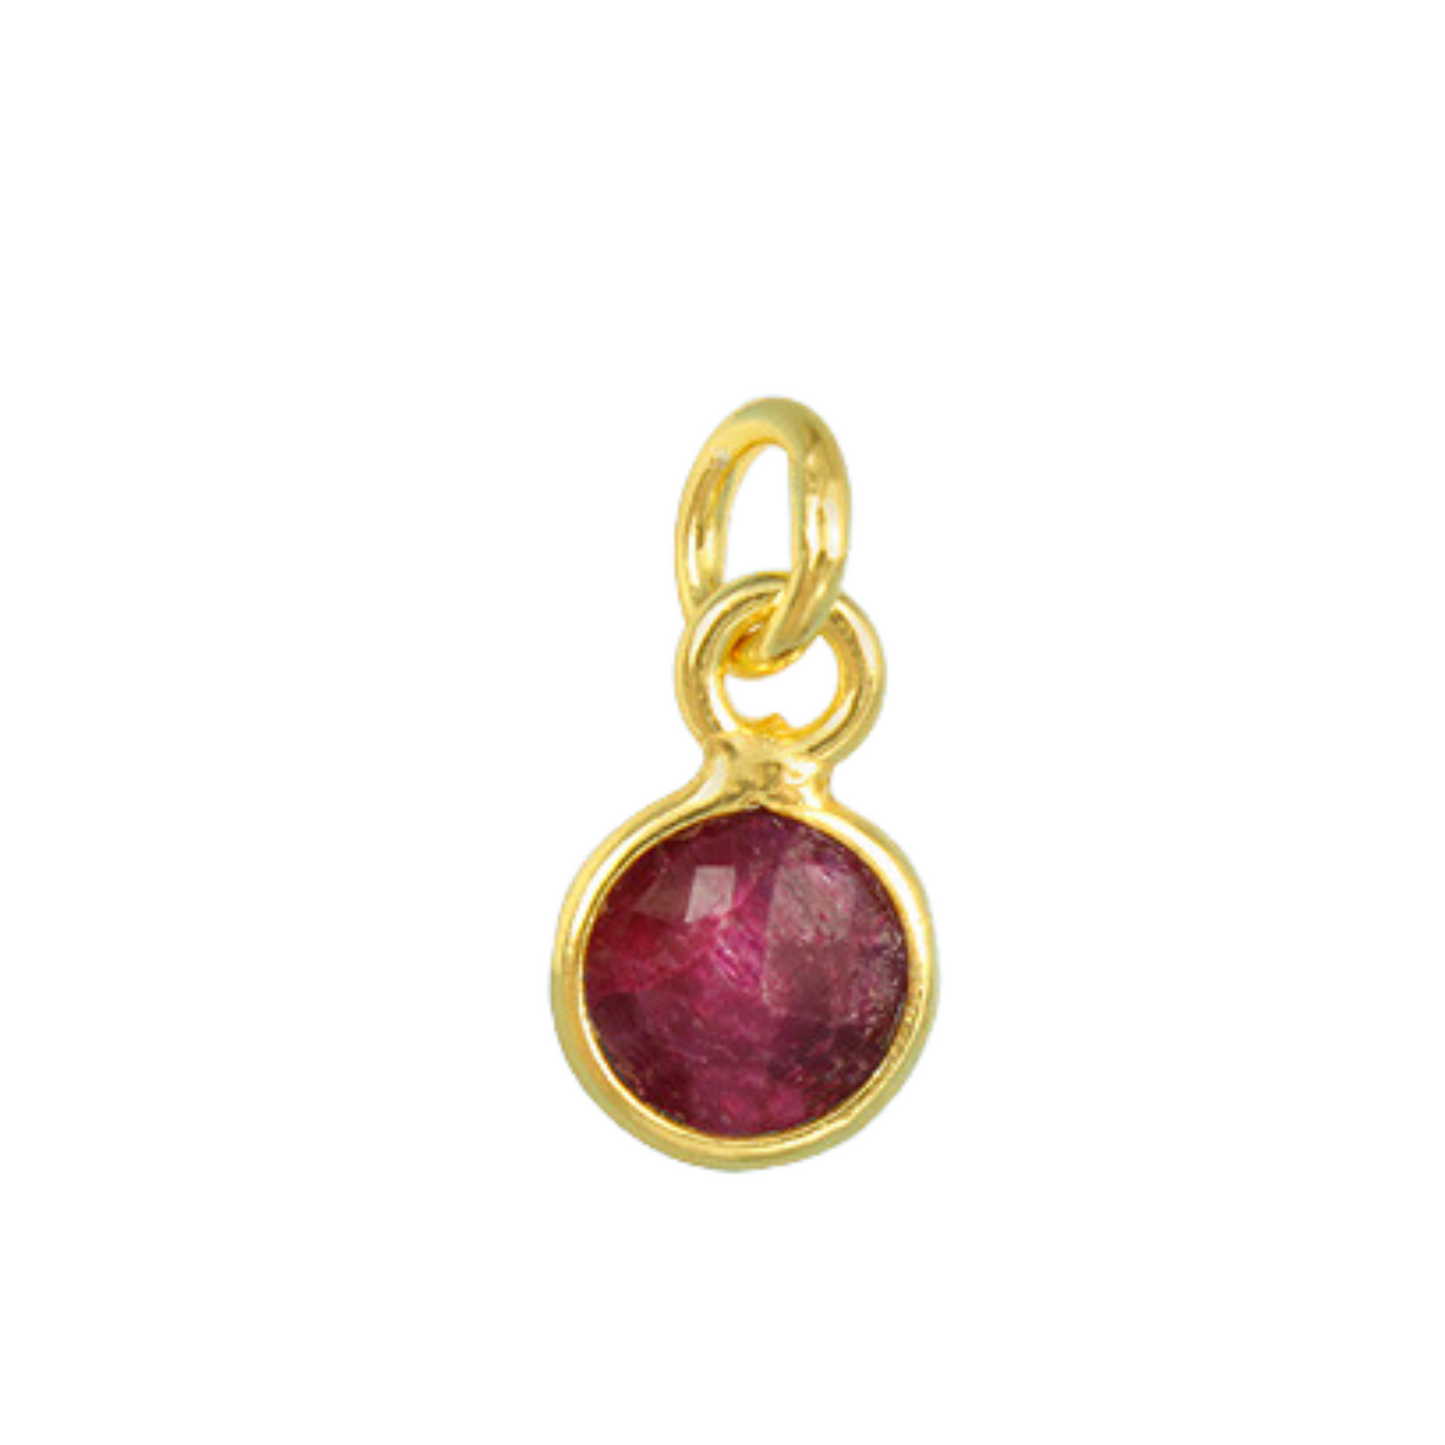 6mm Dyed Ruby Bezel Charm (6 pieces)